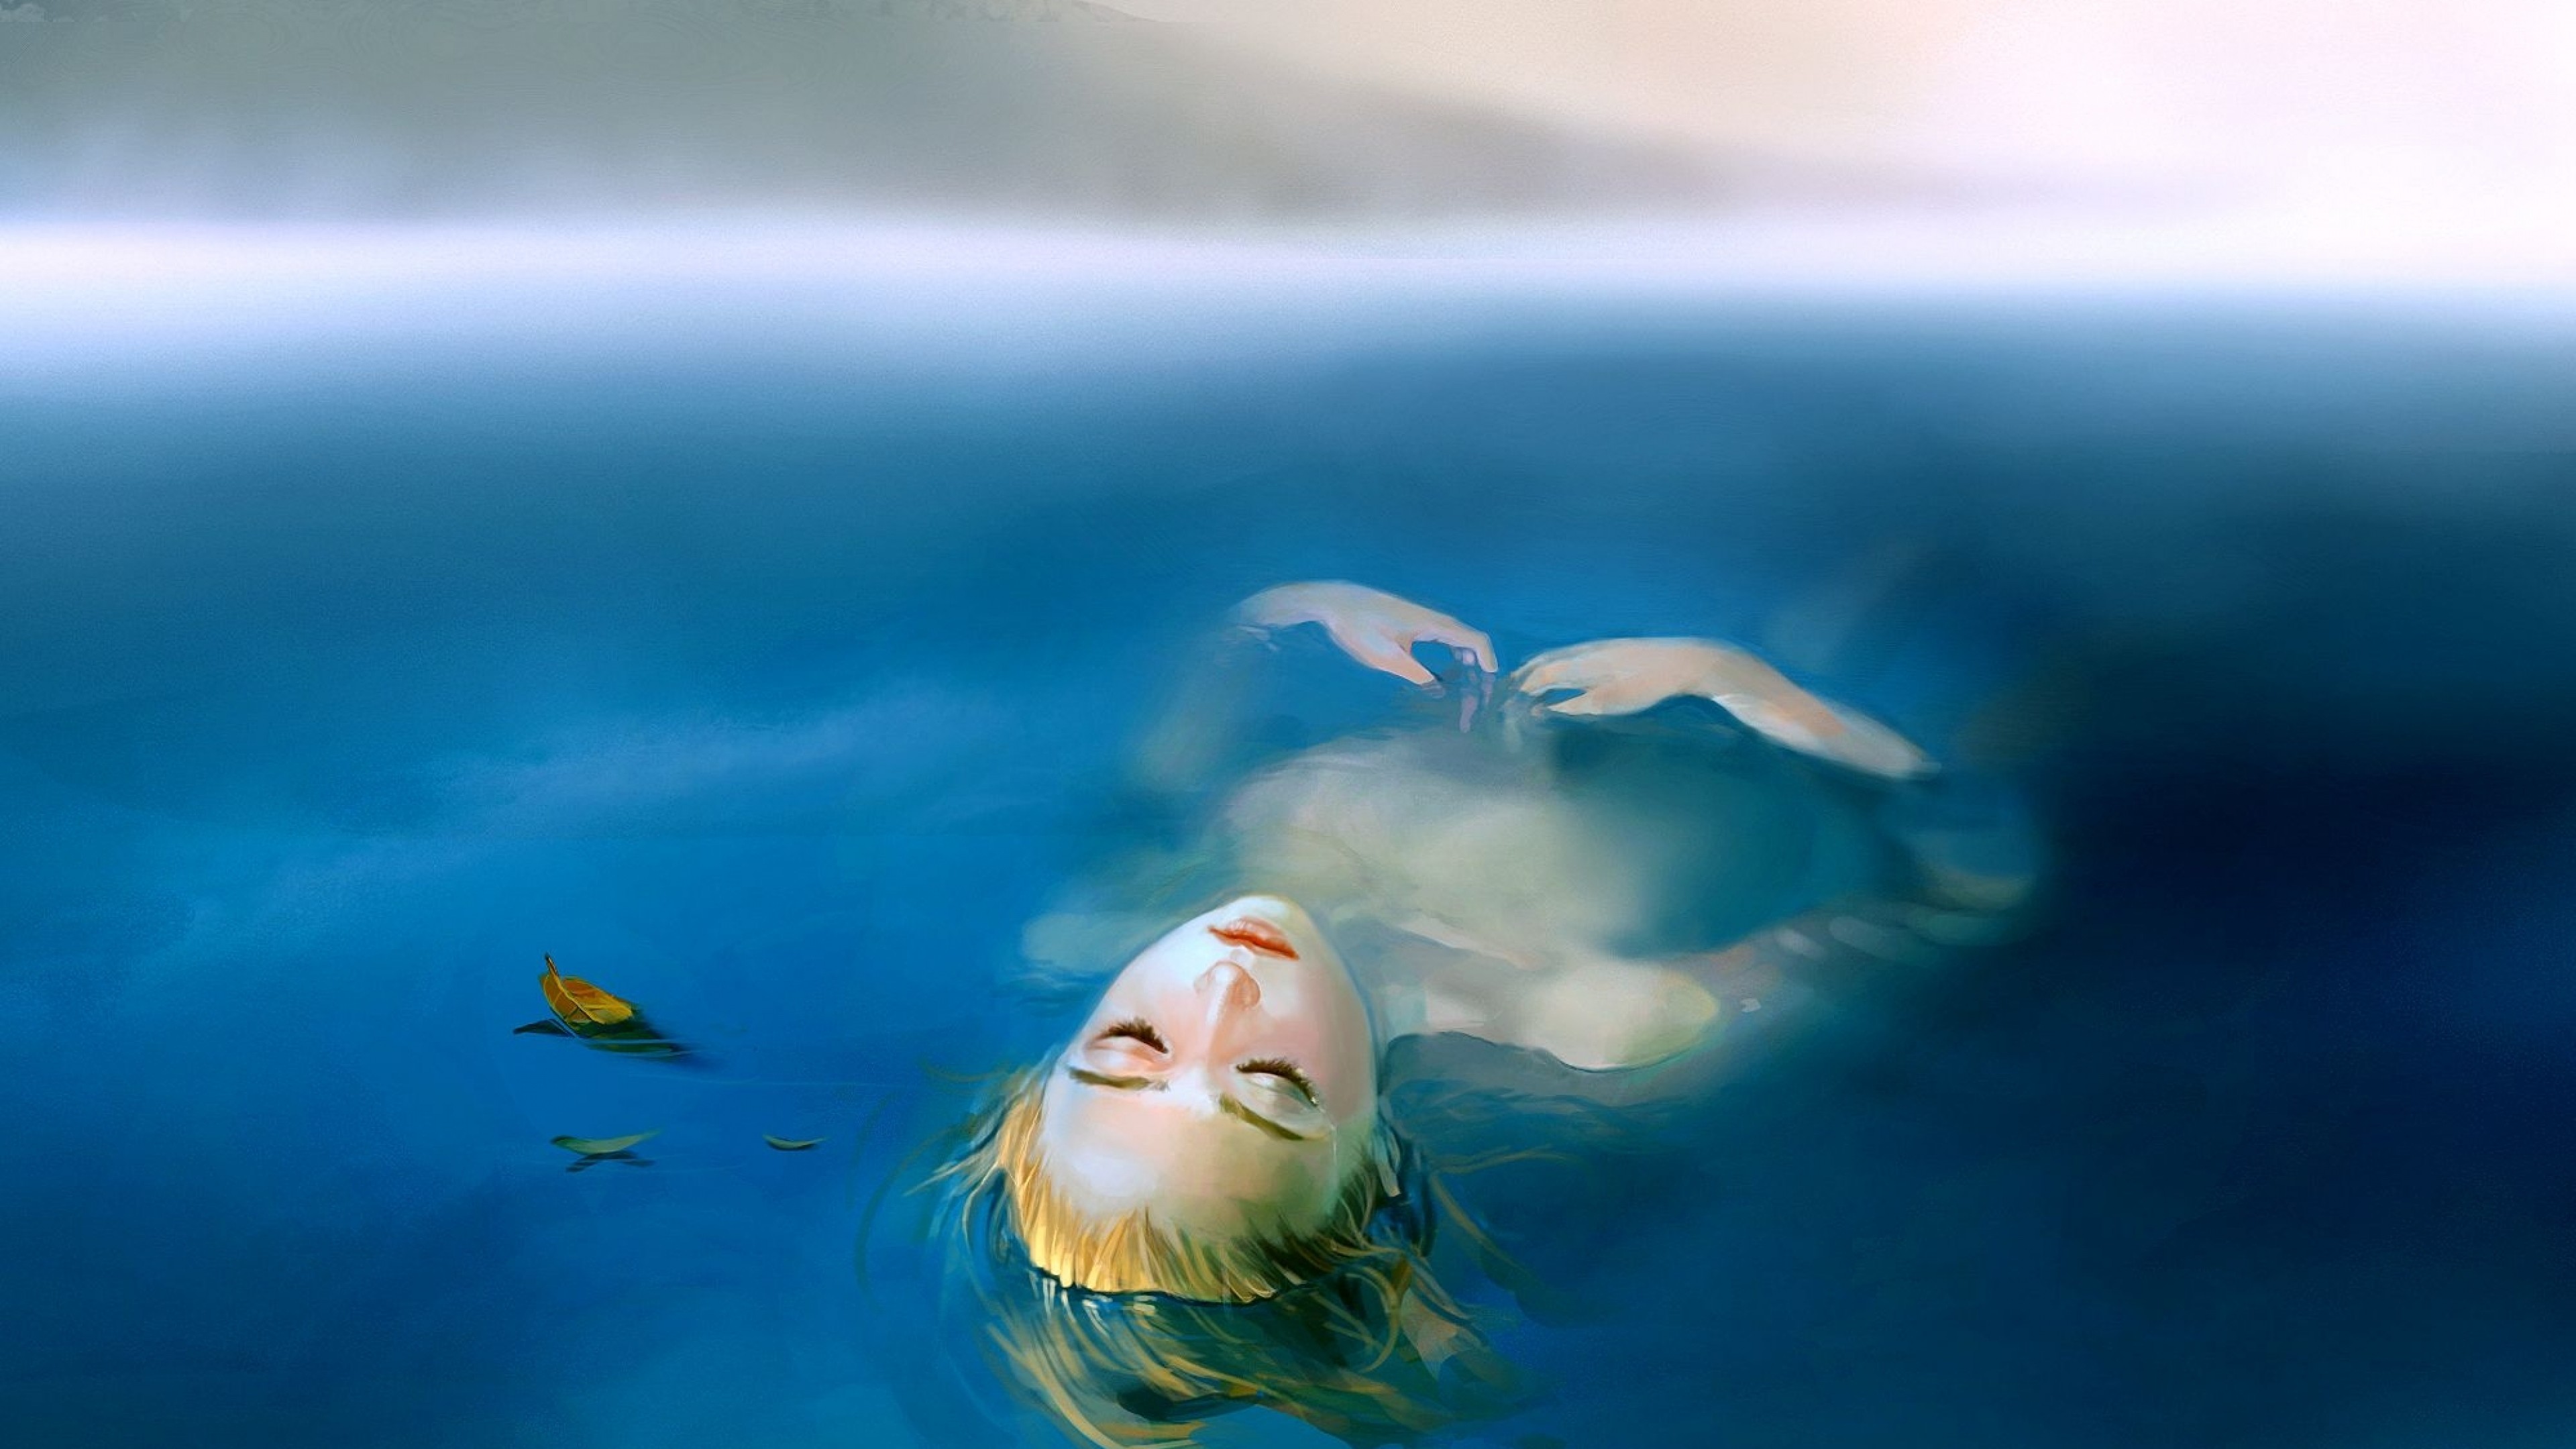 3840x2160  Wallpaper girl, water, corpse, drowned woman, body, death